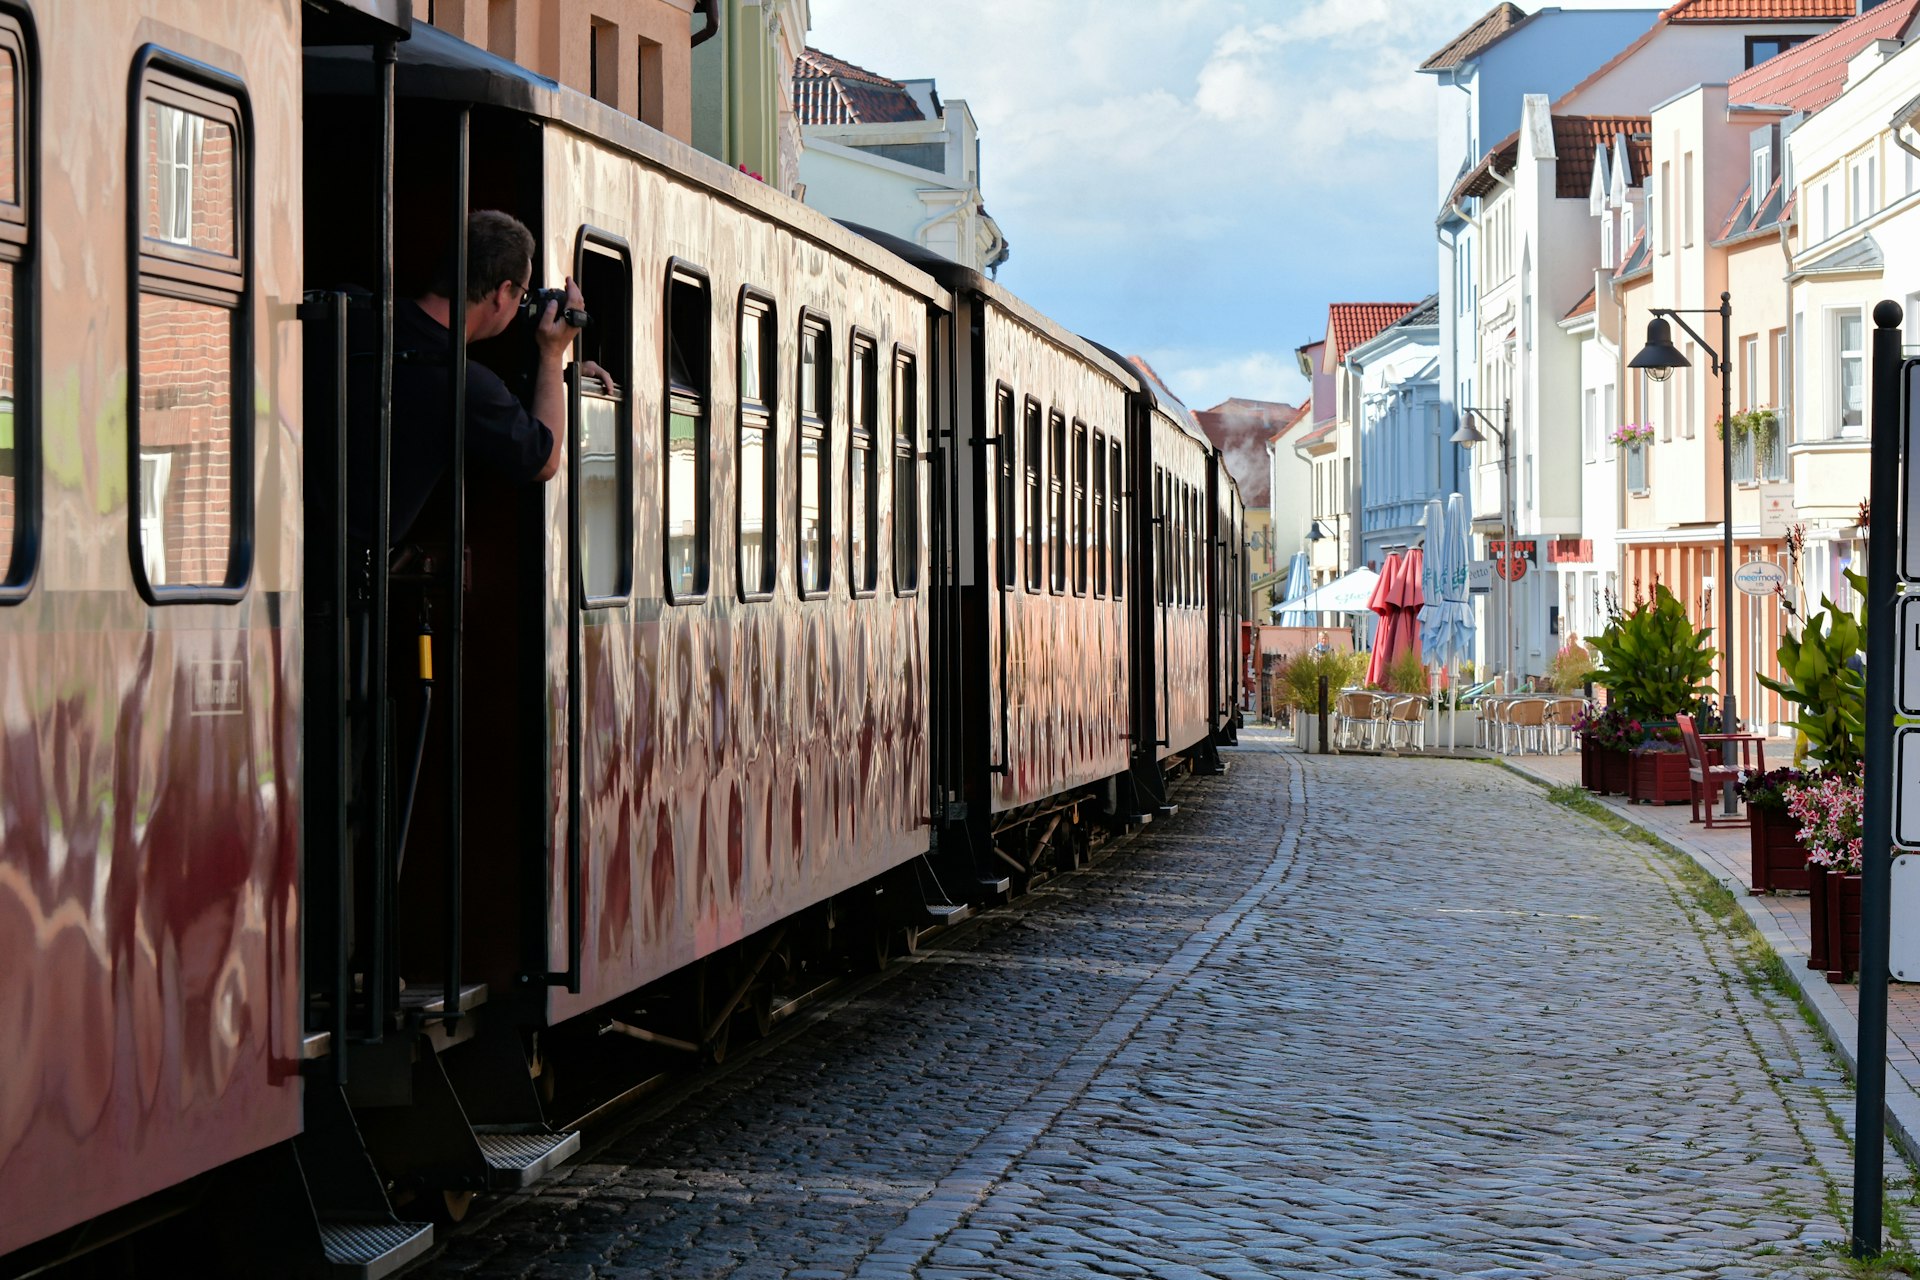 A man slightly leans out of a train to take a photo of an old cobbled stone town 